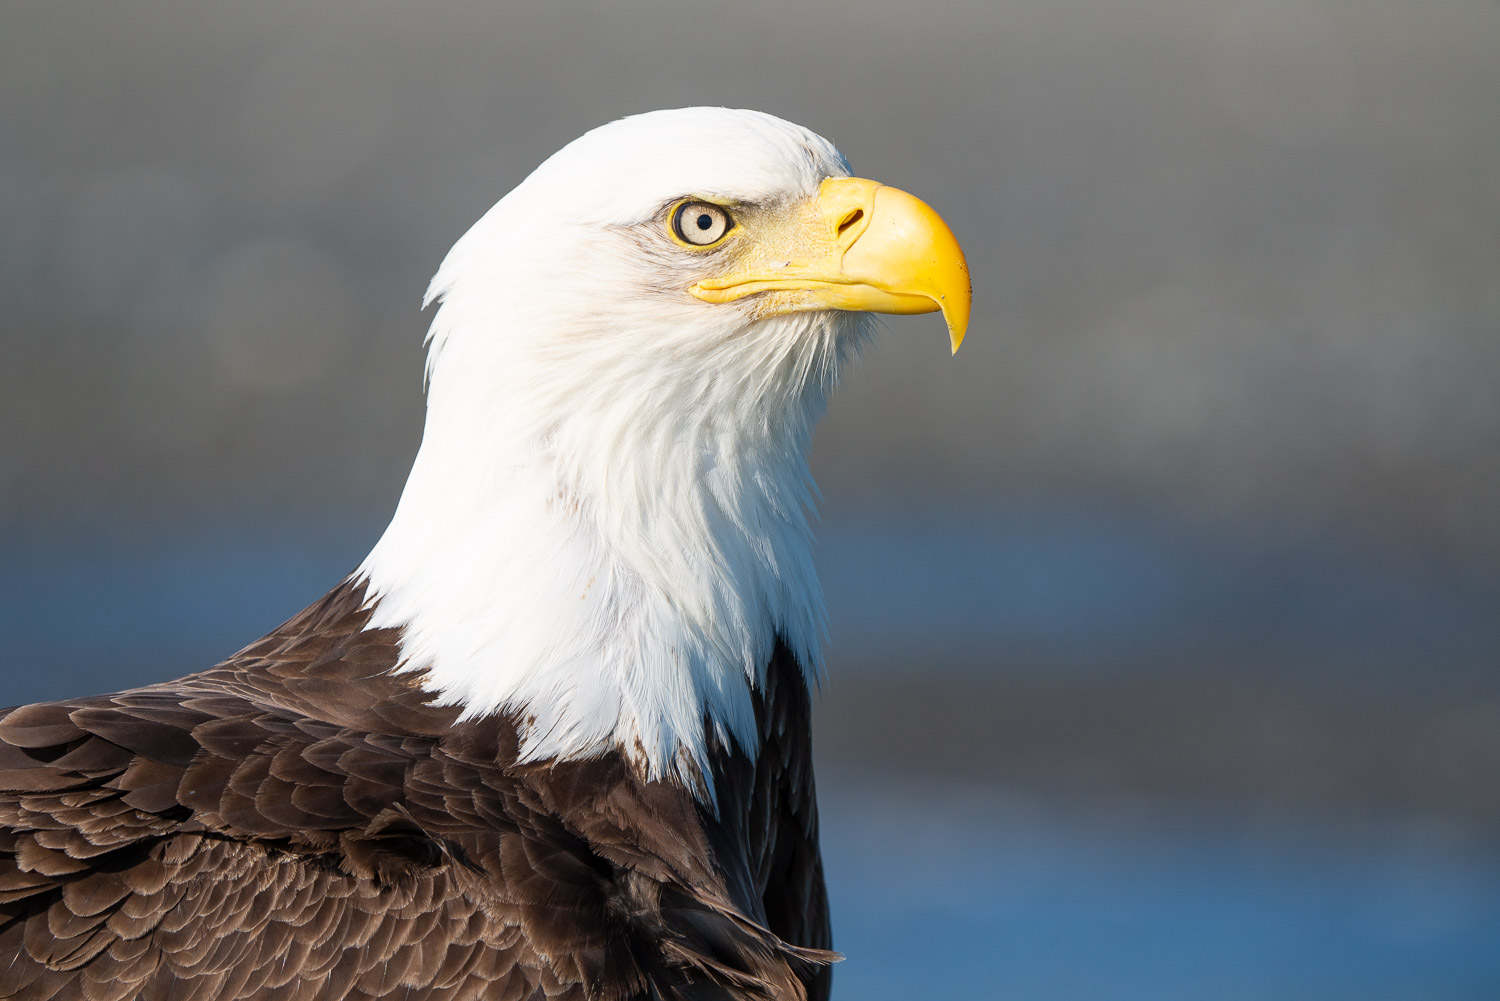 Bald Eagle Photographed with Sony 200-600 and Sony a7R III